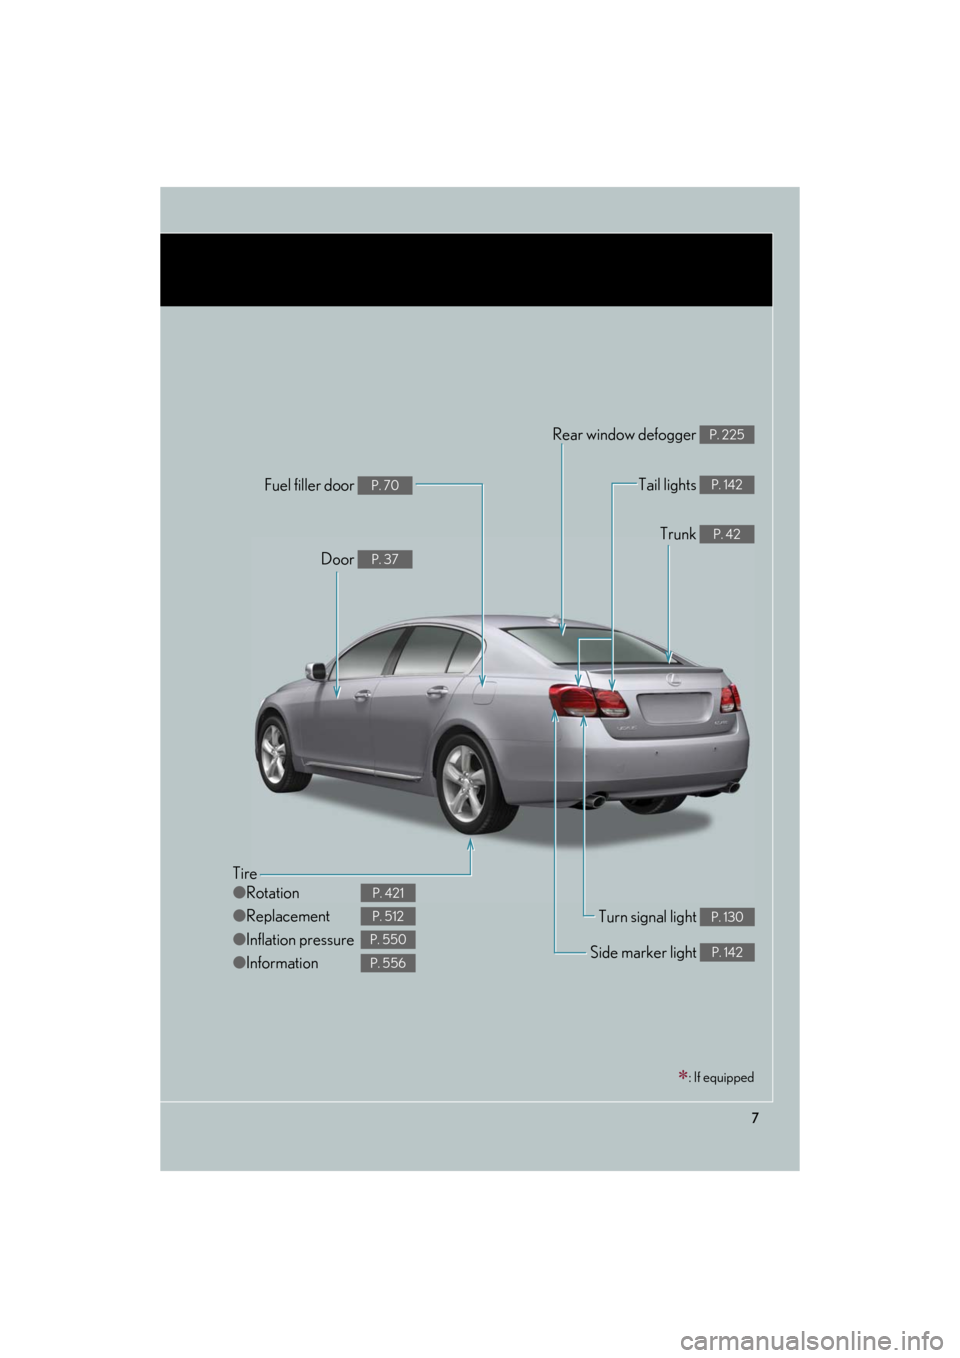 Lexus GS350 2008  Using the audio system / LEXUS 2008 GS460/350 OWNERS MANUAL (OM30A87U) 7
GS_G_U
May 13, 2008 5:14 pm
Tire
●Rotation
● Replacement
● Inflation pressure
● Information
P. 421
P. 512
P. 550
P. 556
Tail lights P. 142
Side marker light P. 142
Trunk P. 42
Rear window de